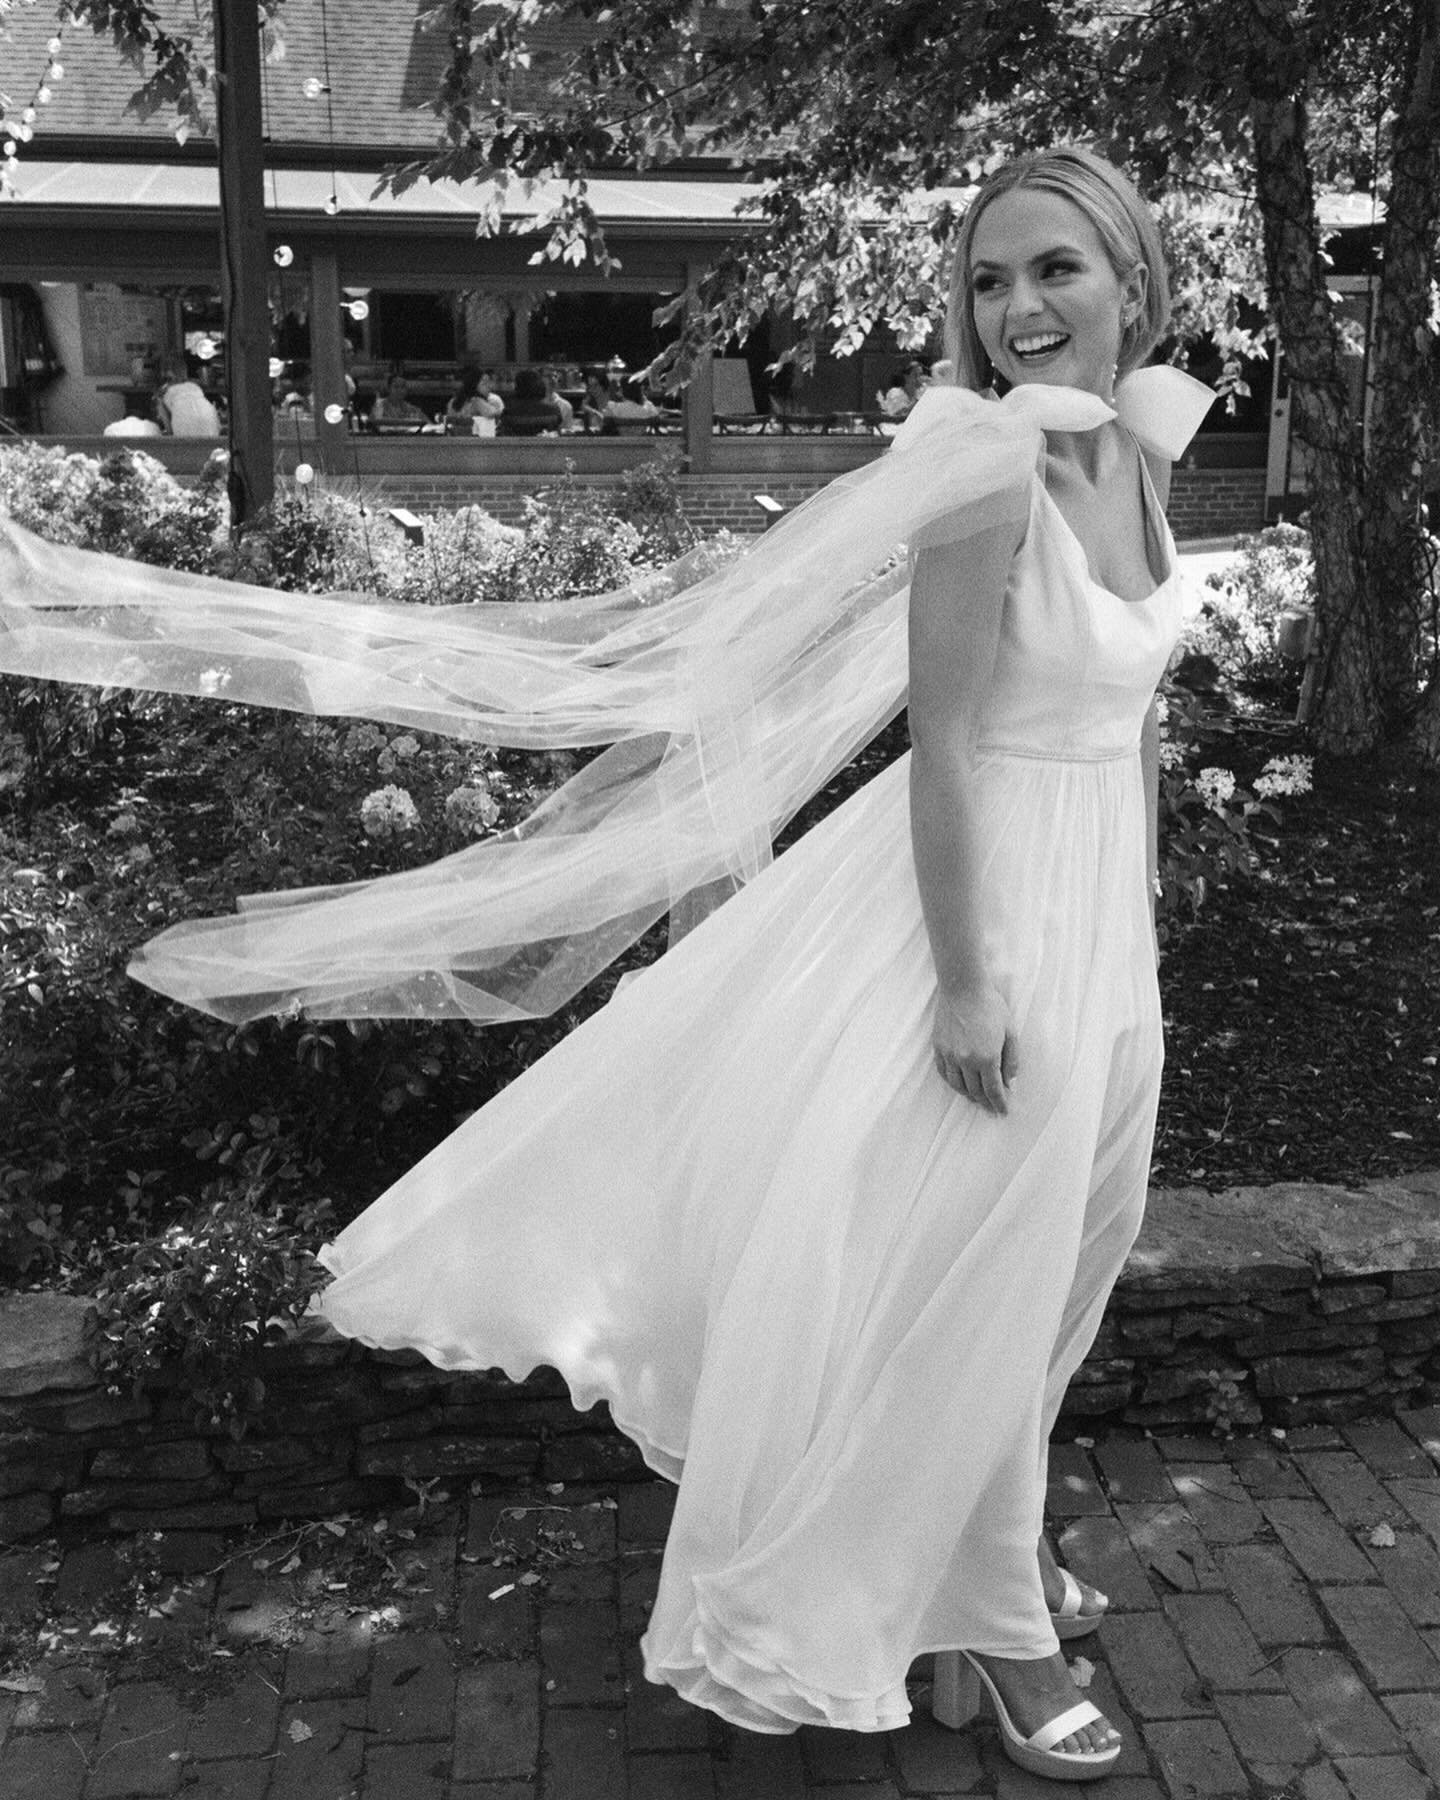 i was rocking some b&amp;w in our little point and shoot this day and caught a few big smiles! and sometimes you get lucky and get to drive the bride to her wedding while she eats a banana 🫶🏼😂